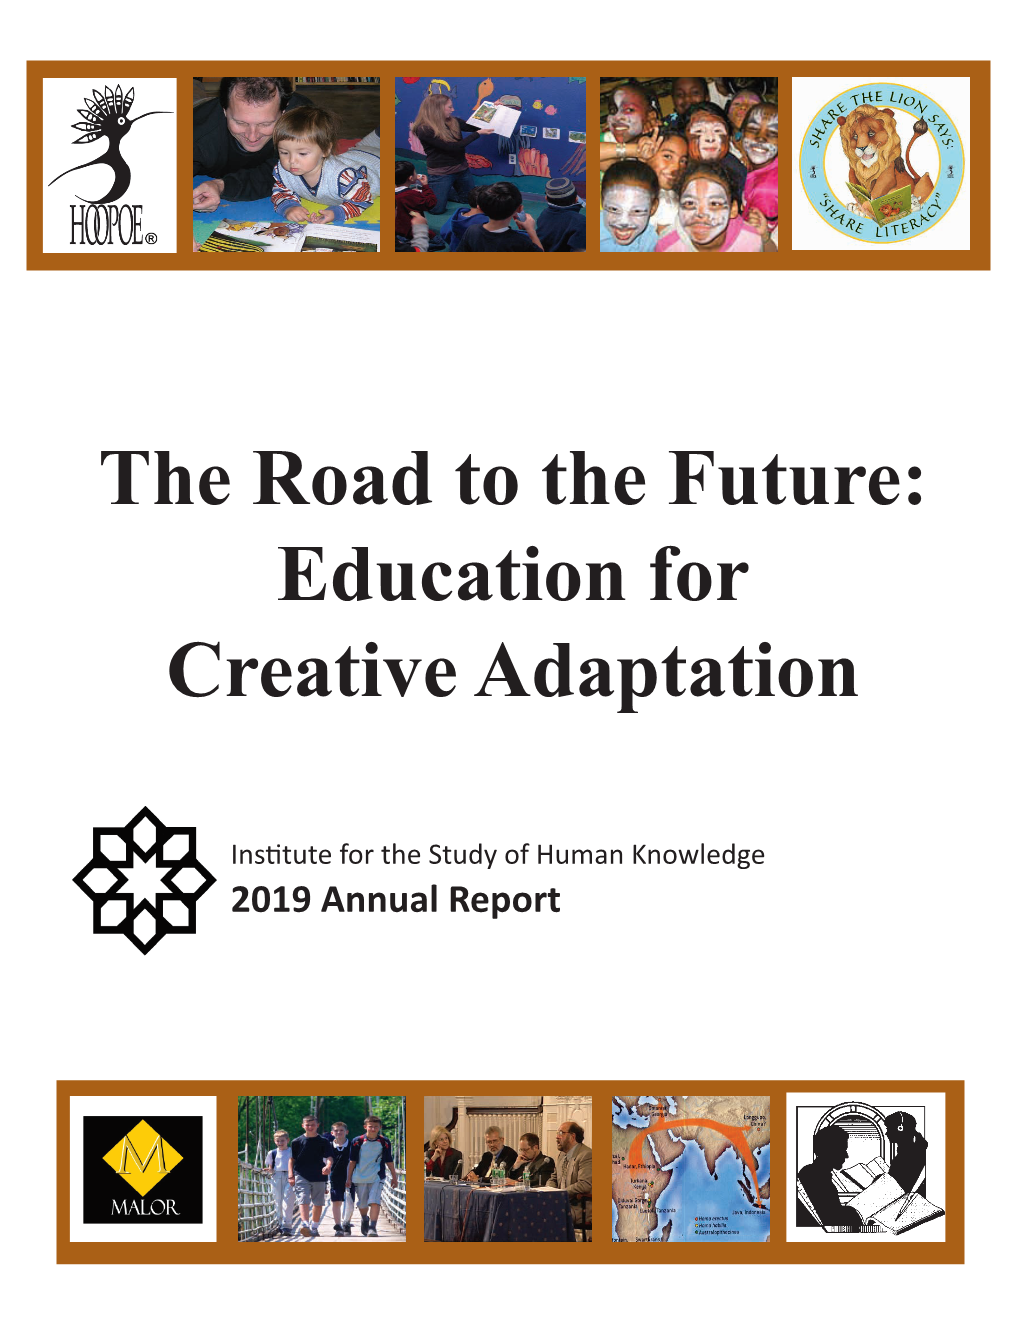 The Road to the Future: Education for Creative Adaptation